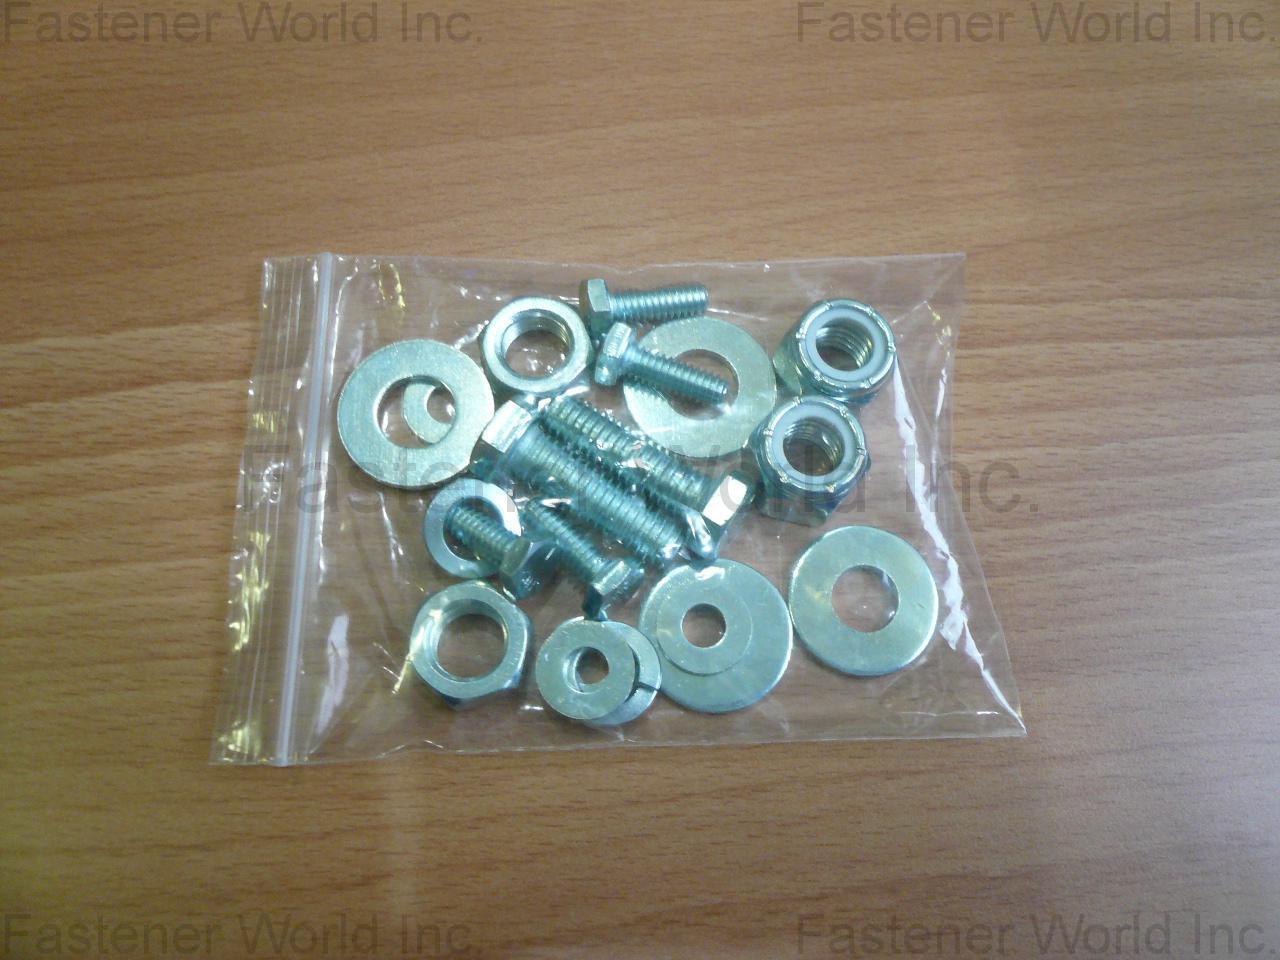 DYNAWARE INDUSTRIAL INC. , Assortment package of automotive fasteners , Automotive Screws